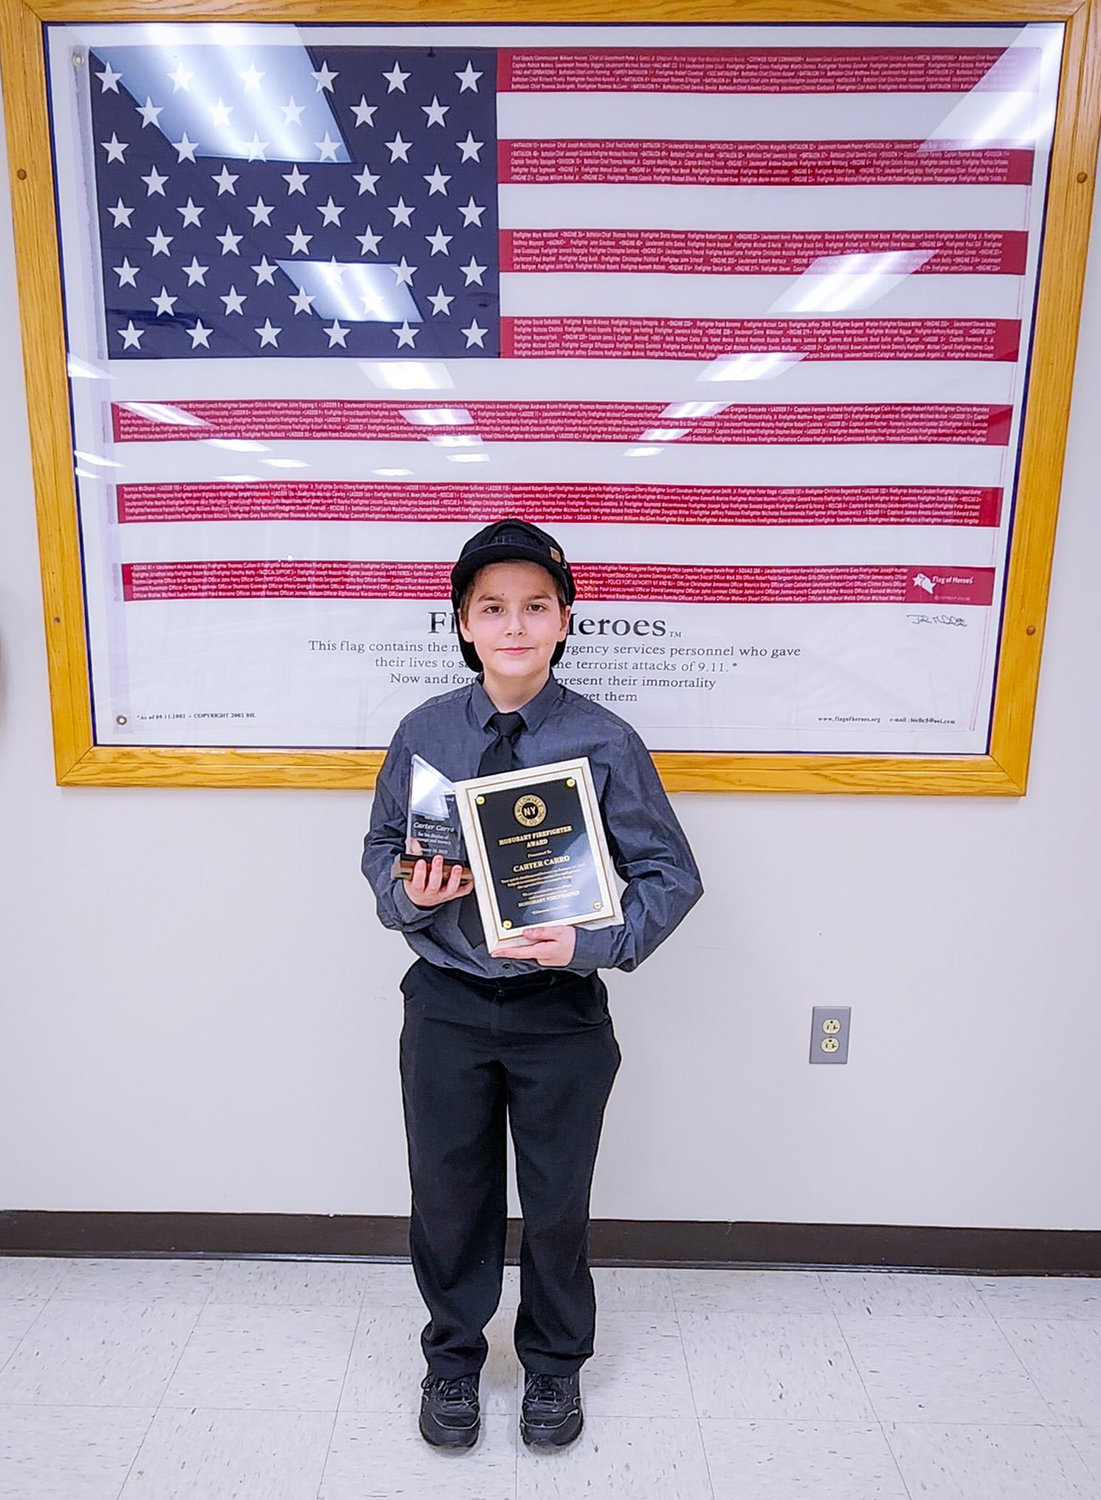 Carter Carro, age 11, of New Hartford, was honored by the Willowvale Fire Department Thursday night for his heroic actions putting out a neighbor's garage fire on Jan. 18. Fire officials said Carro used a fire extinguisher to knock down the flames before they could spread.